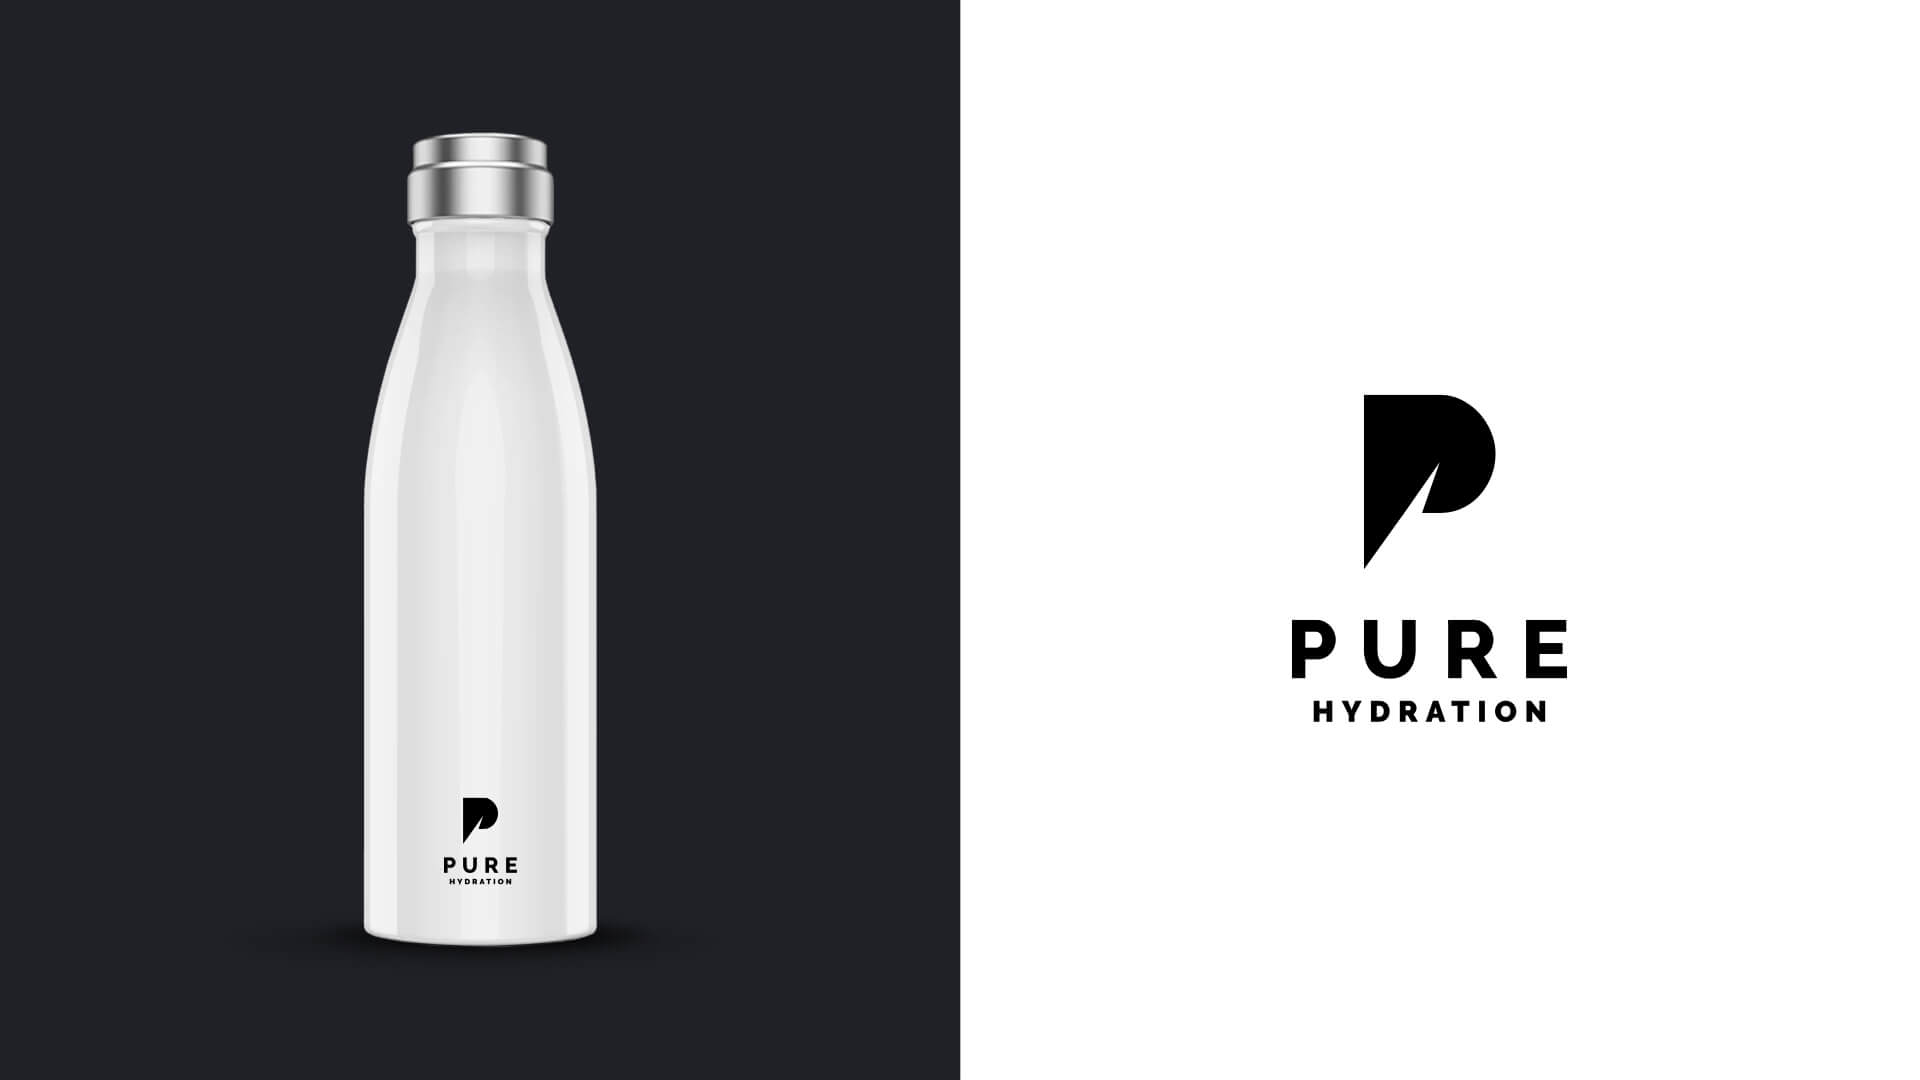 pure hydration identity by branding agency ronins